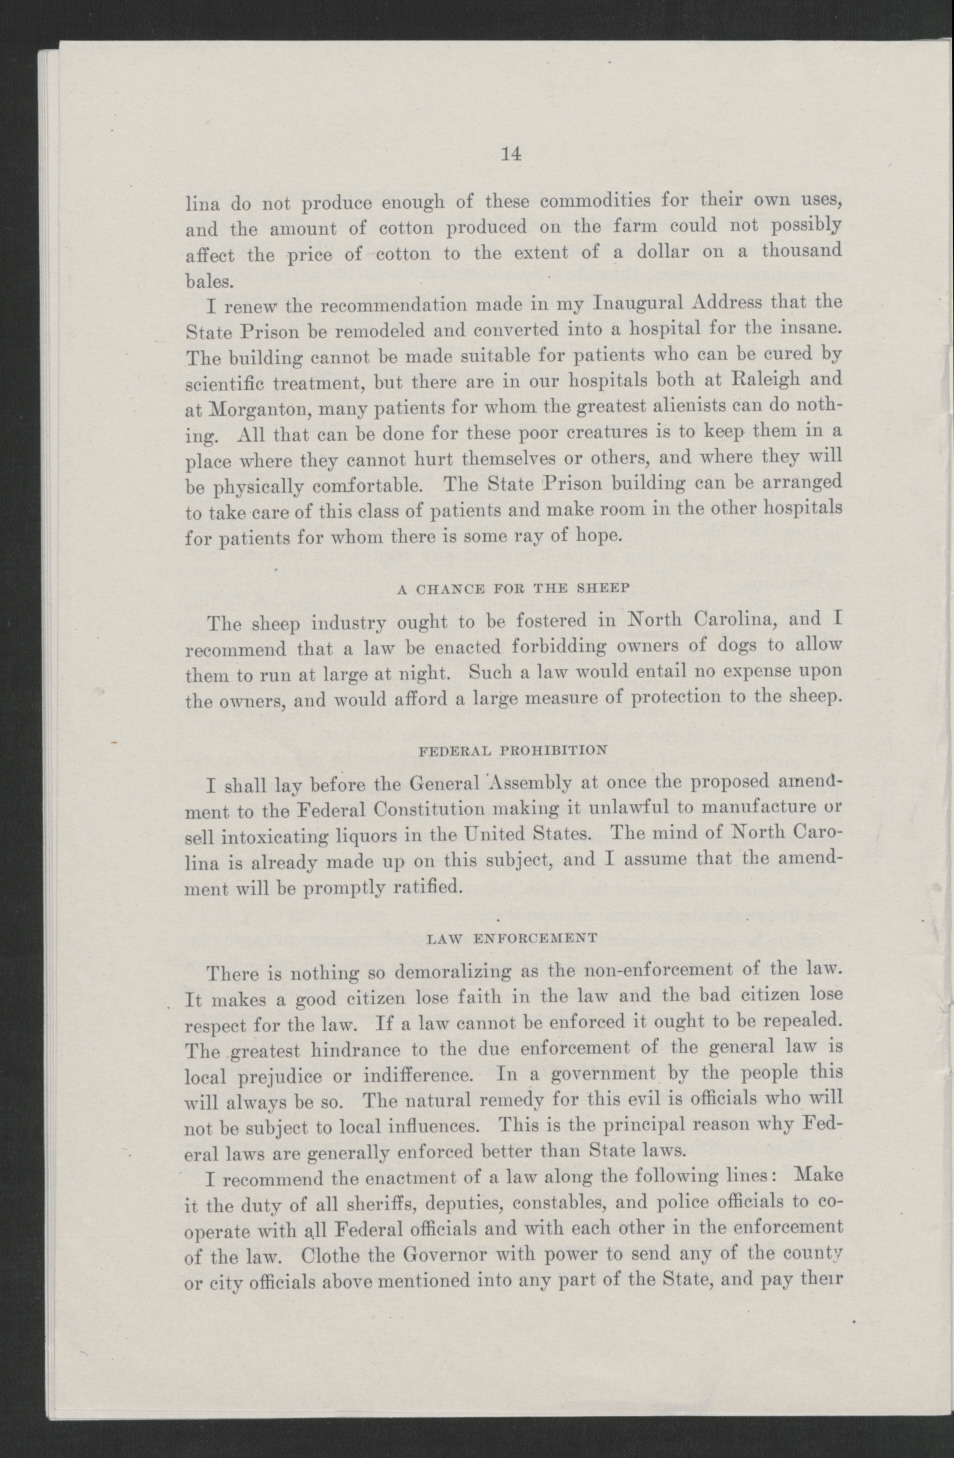 Biennial Message of Governor Thomas W. Bickett to the General Assembly, January 9, 1919, page 12